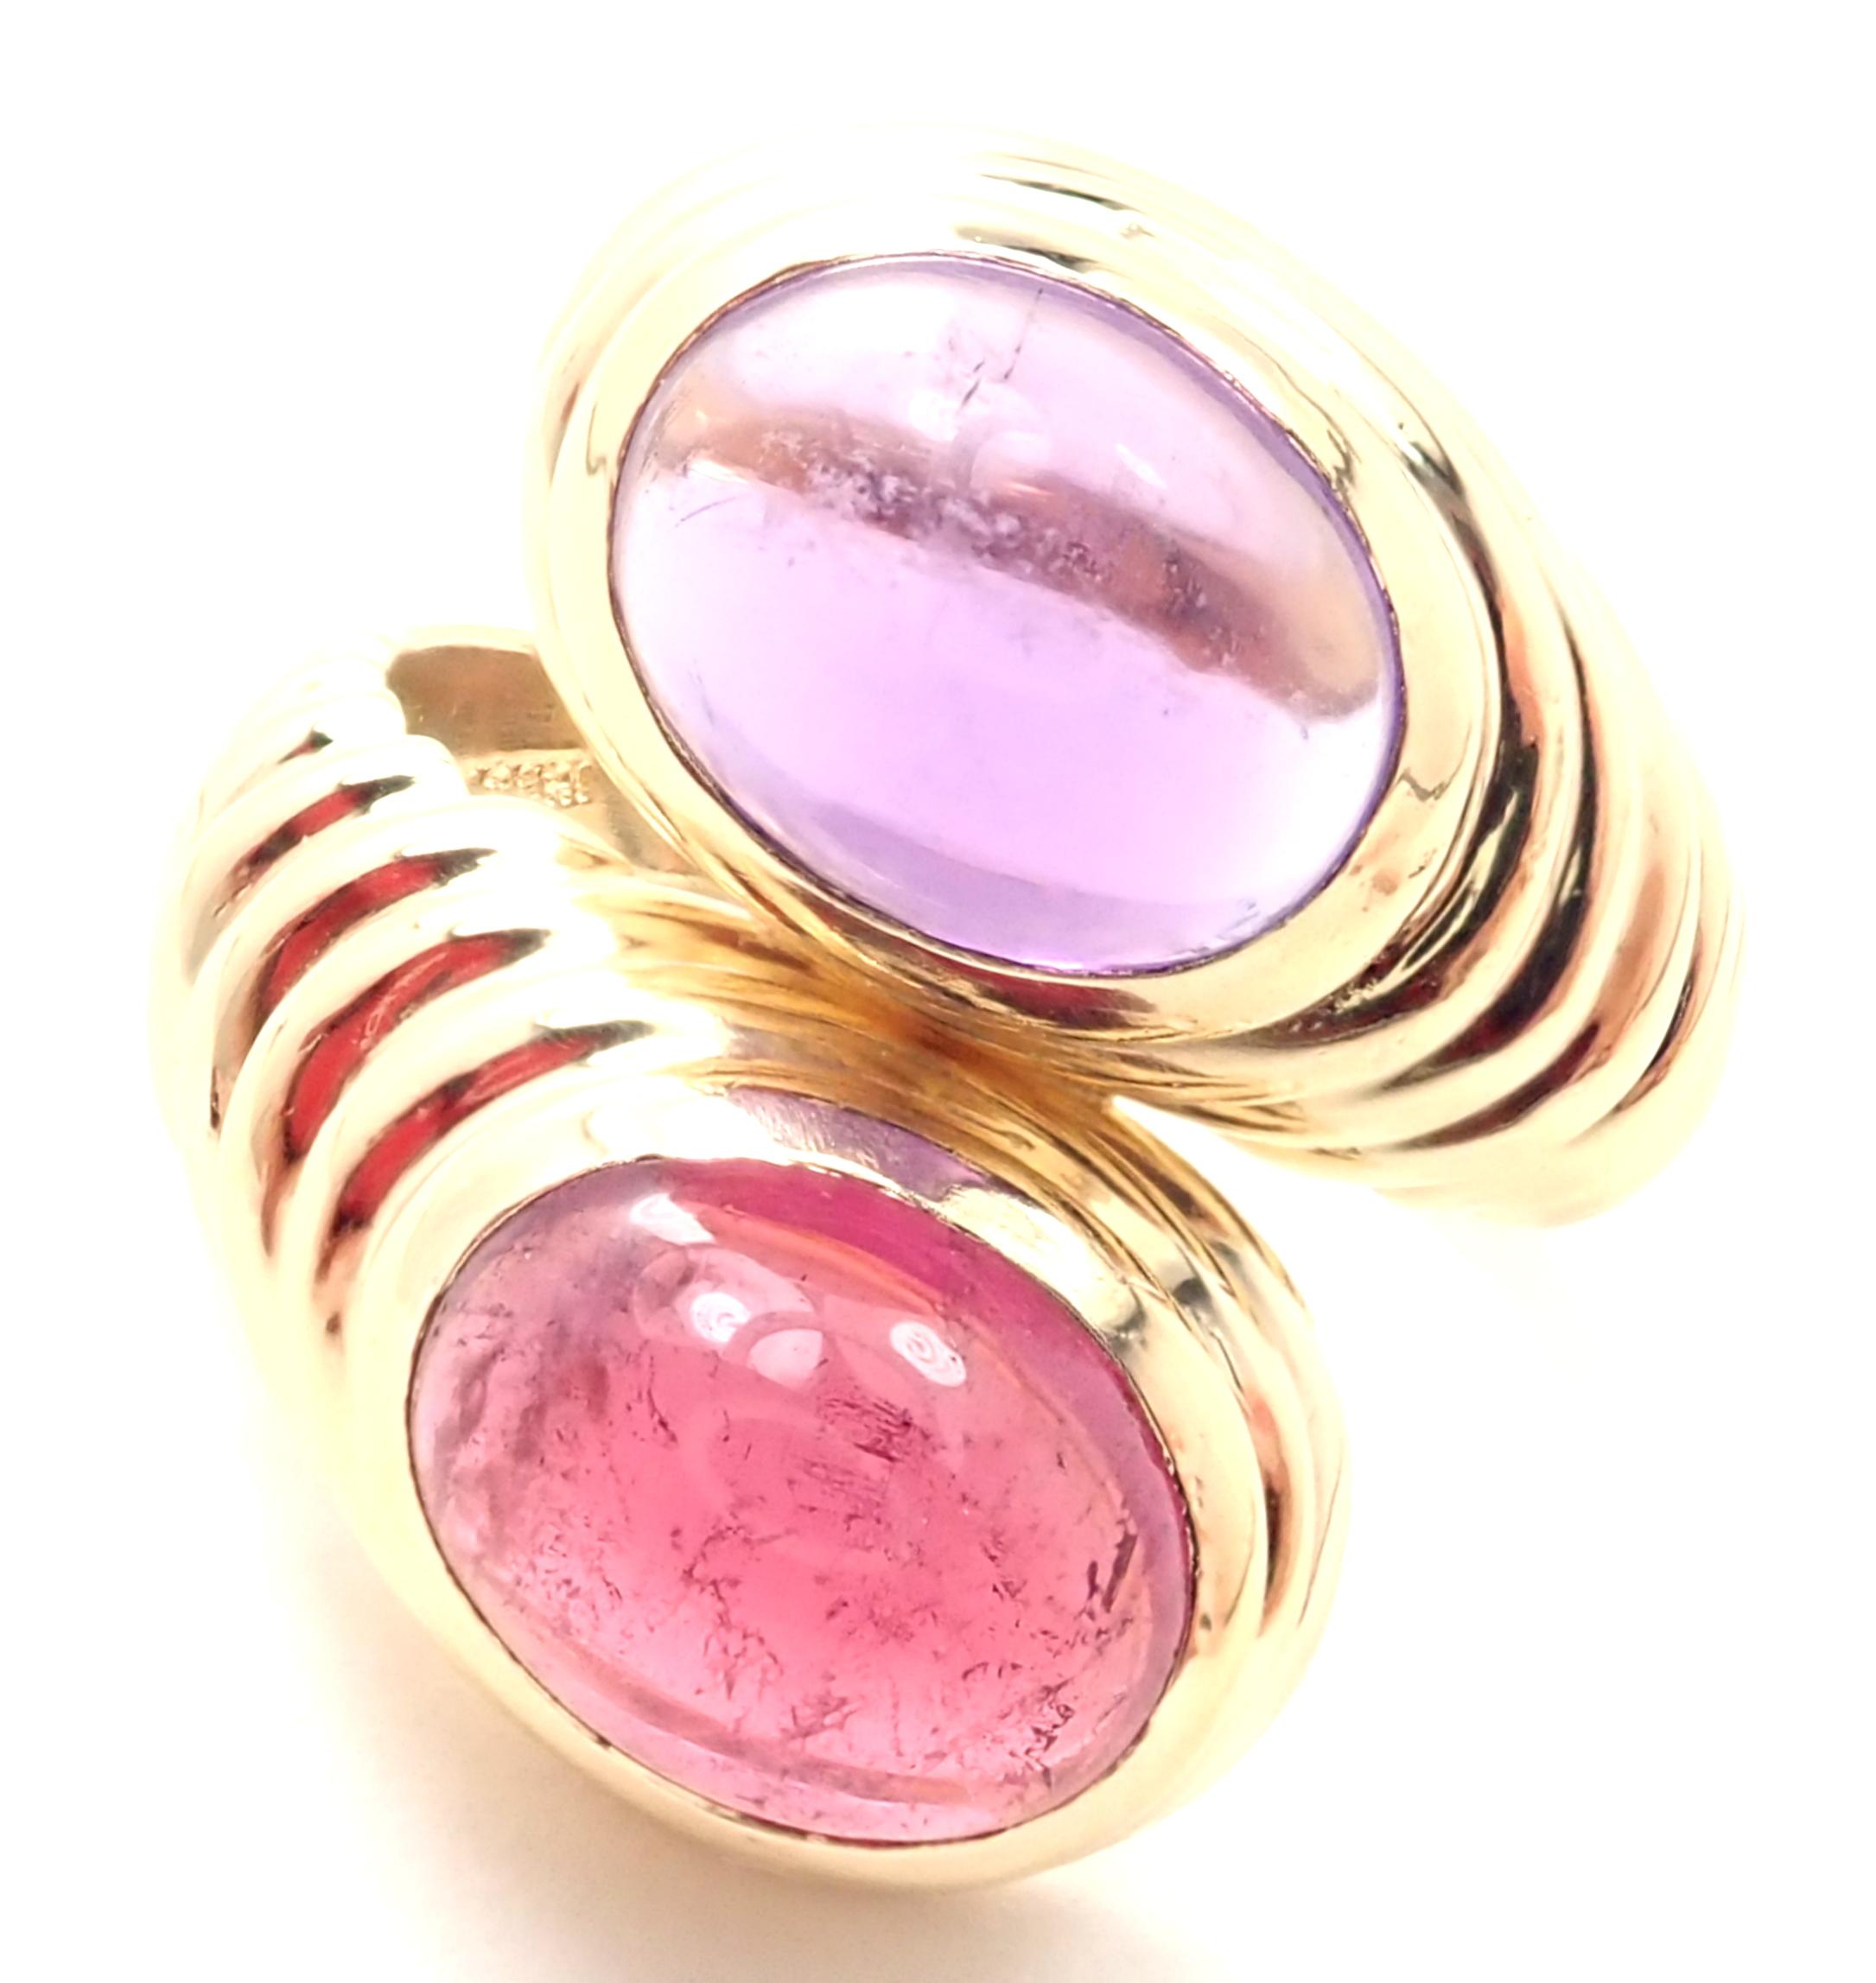 18k Yellow Gold Pink Tourmaline And Amethyst Ring By Bulgari. 
With 1 Oval Pink Tourmaline 7mm x 10mm and 
1 Oval Amethyst 7mm x 10mm
Details:
Ring Size: 4.5 (resize available)
Width: 20mm
Weight: 13.1 grams
Stamped Hallmarks: Bulgari, 750,